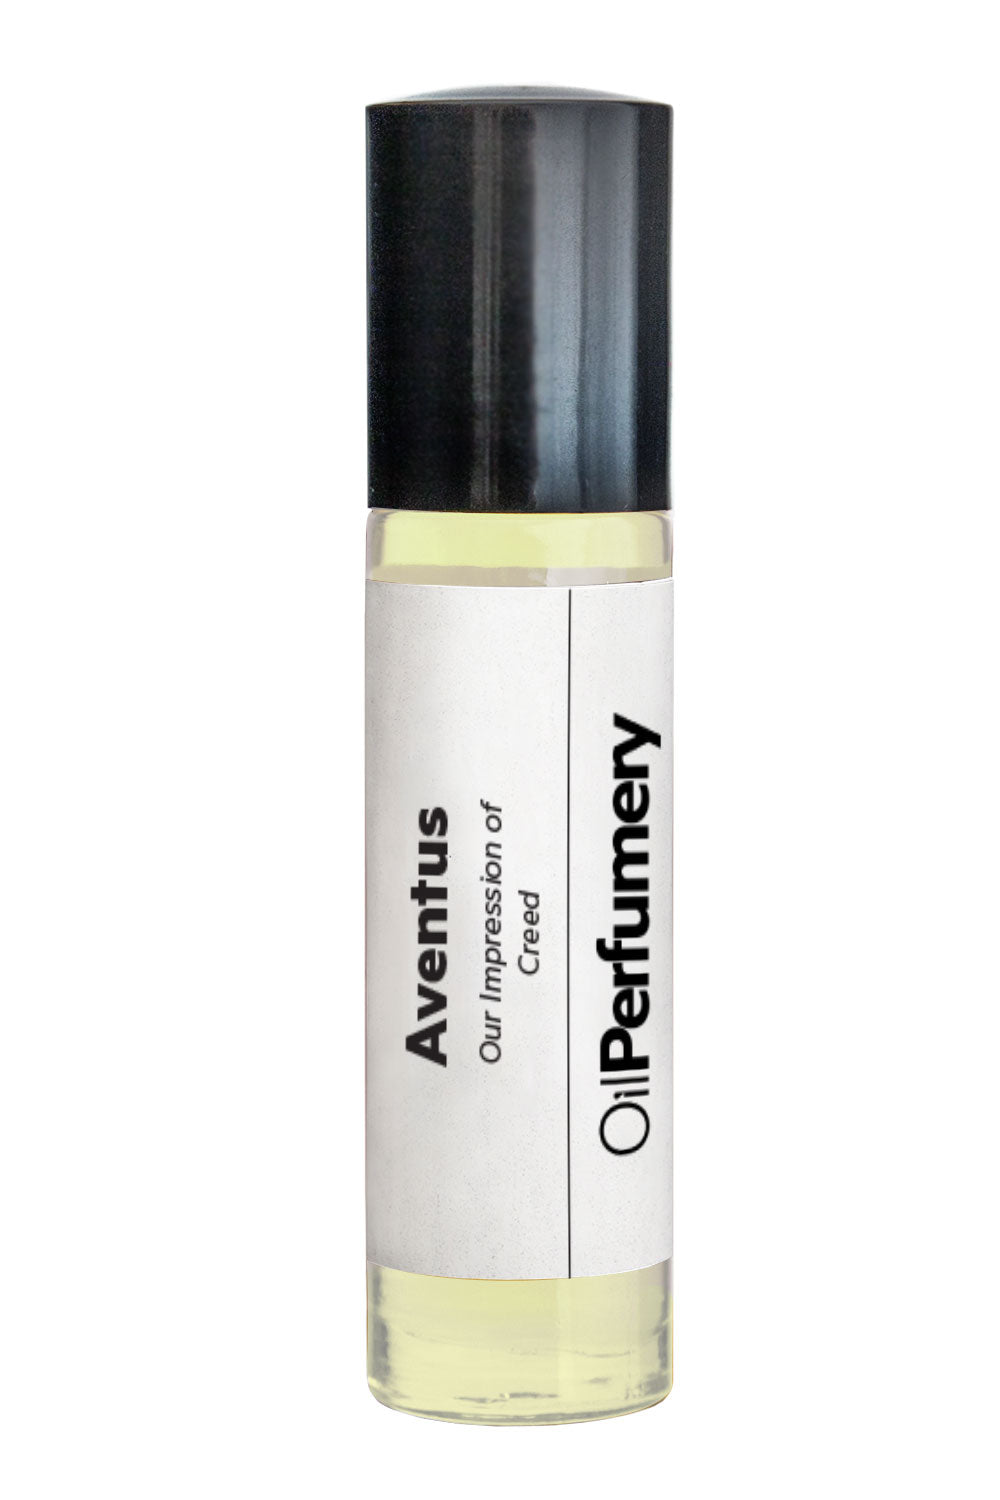 Quality Fragrance Oils' Impression #101 Compatible with Aventus for Men  (10ml Roll On) Aventus for Men